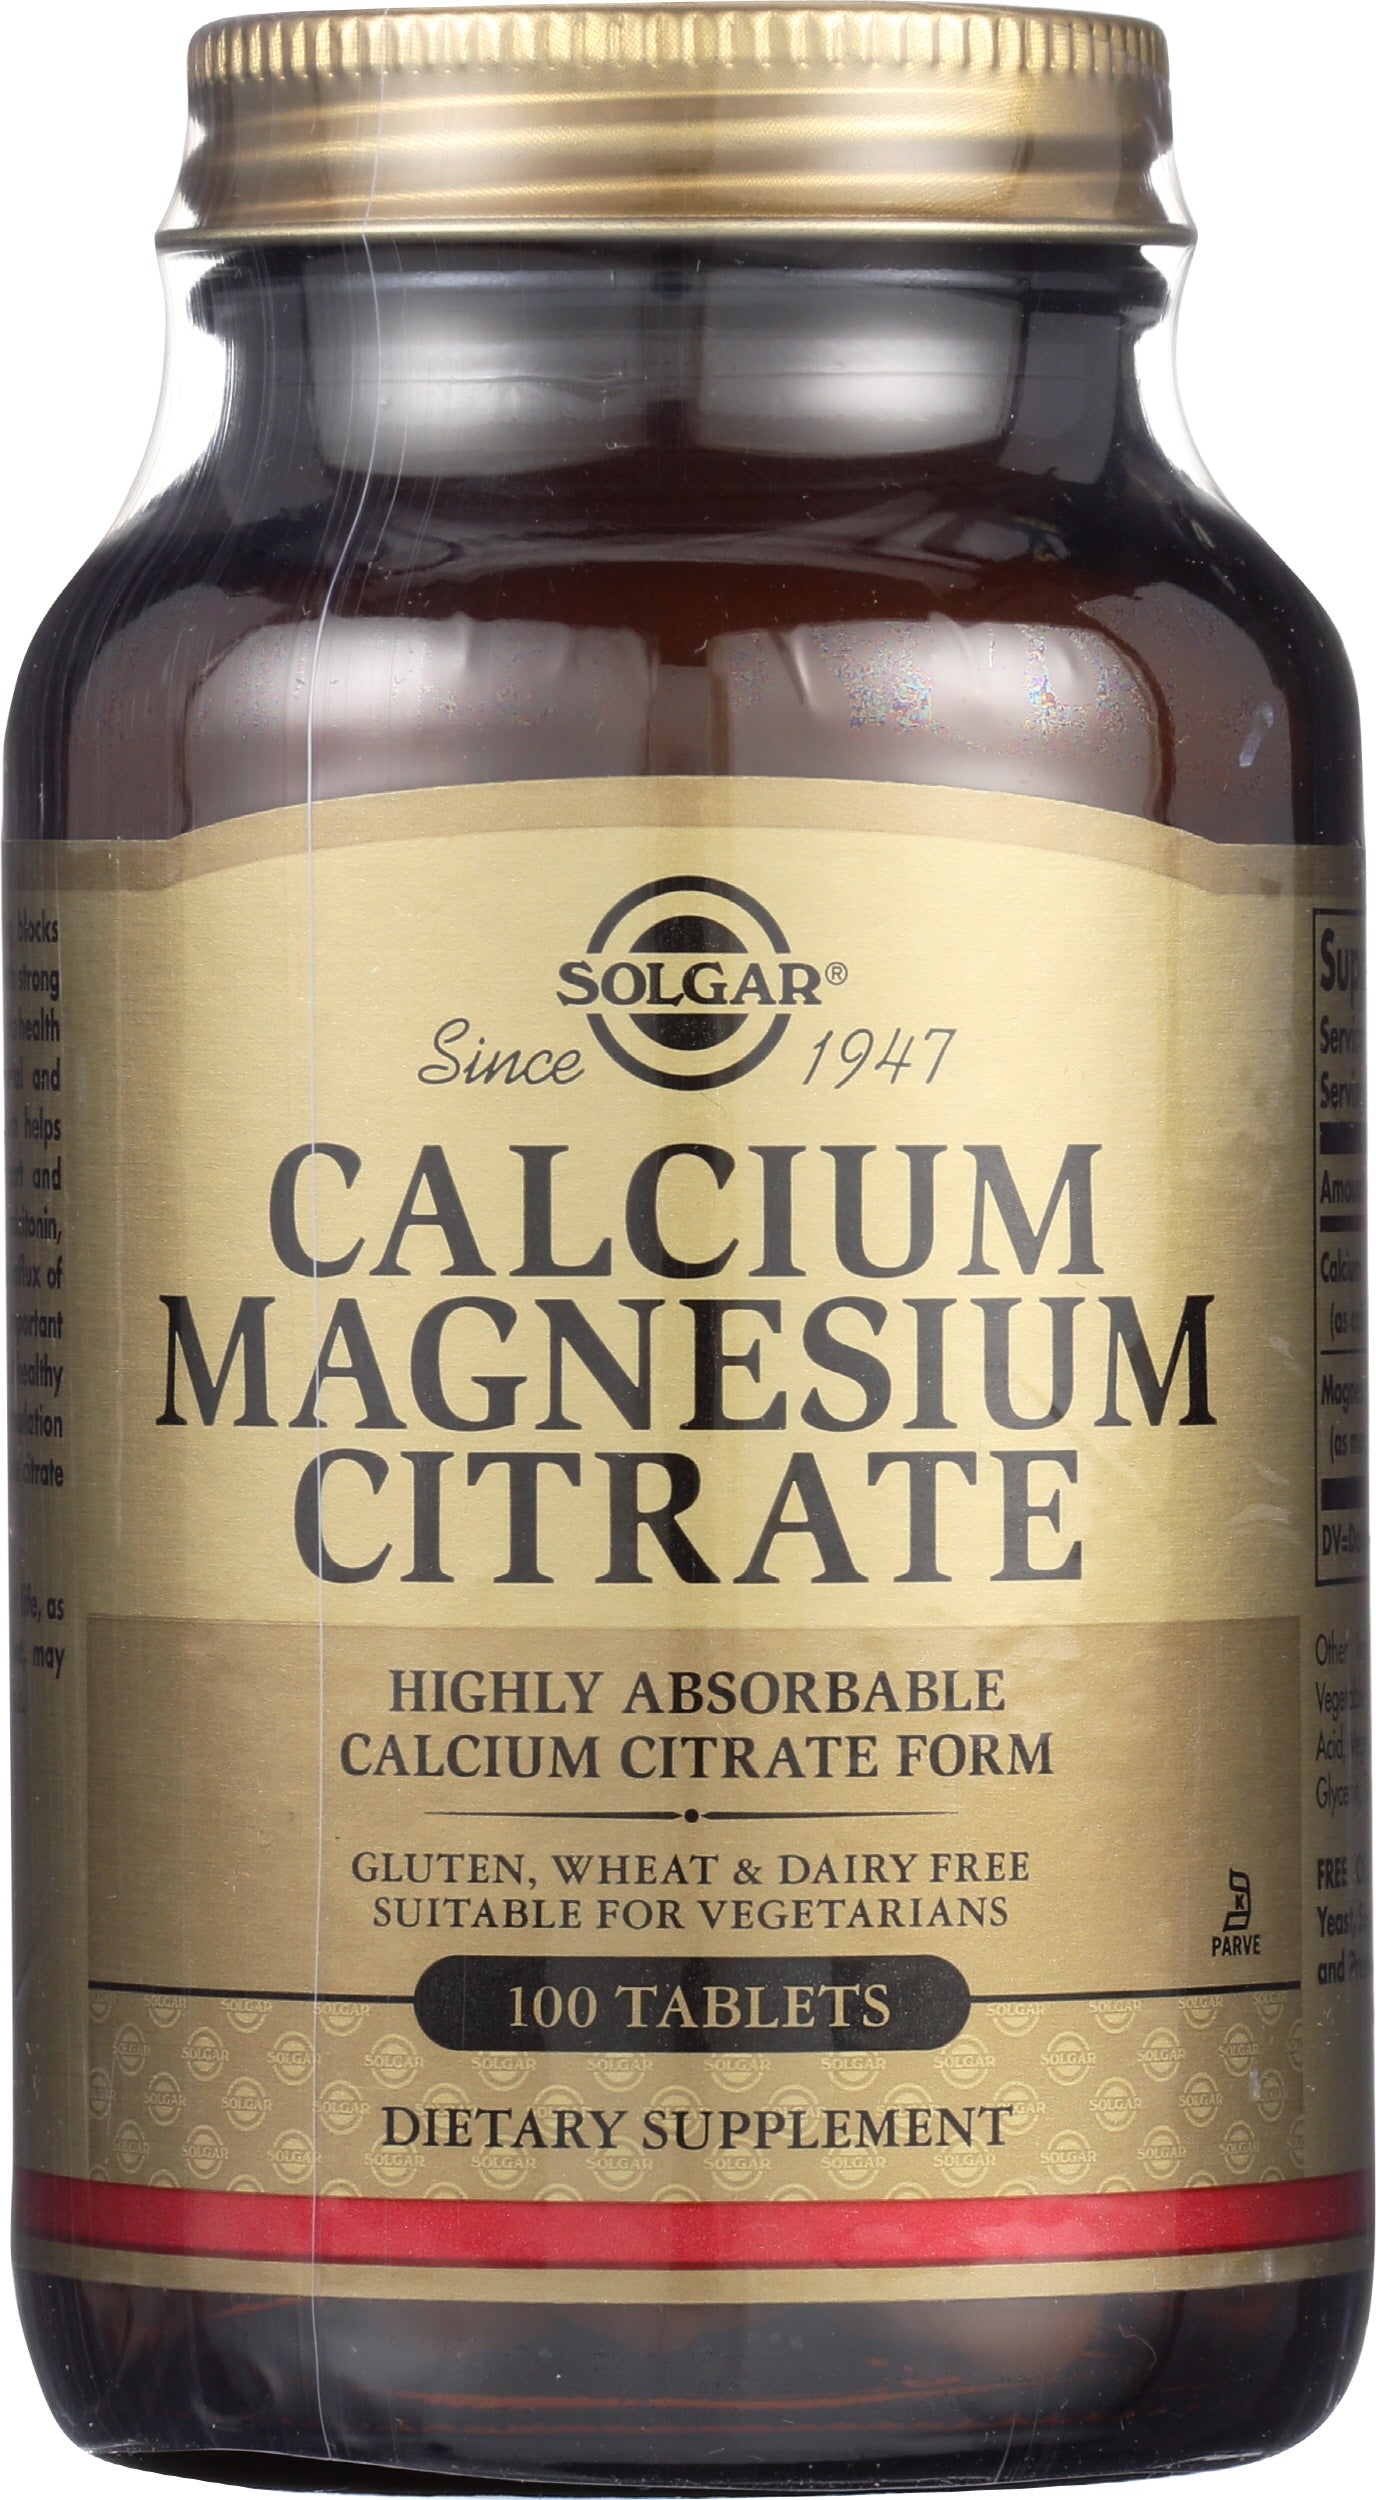 Solgar Calcium Magnesium Citrate 100 Tablets Front of Bottle